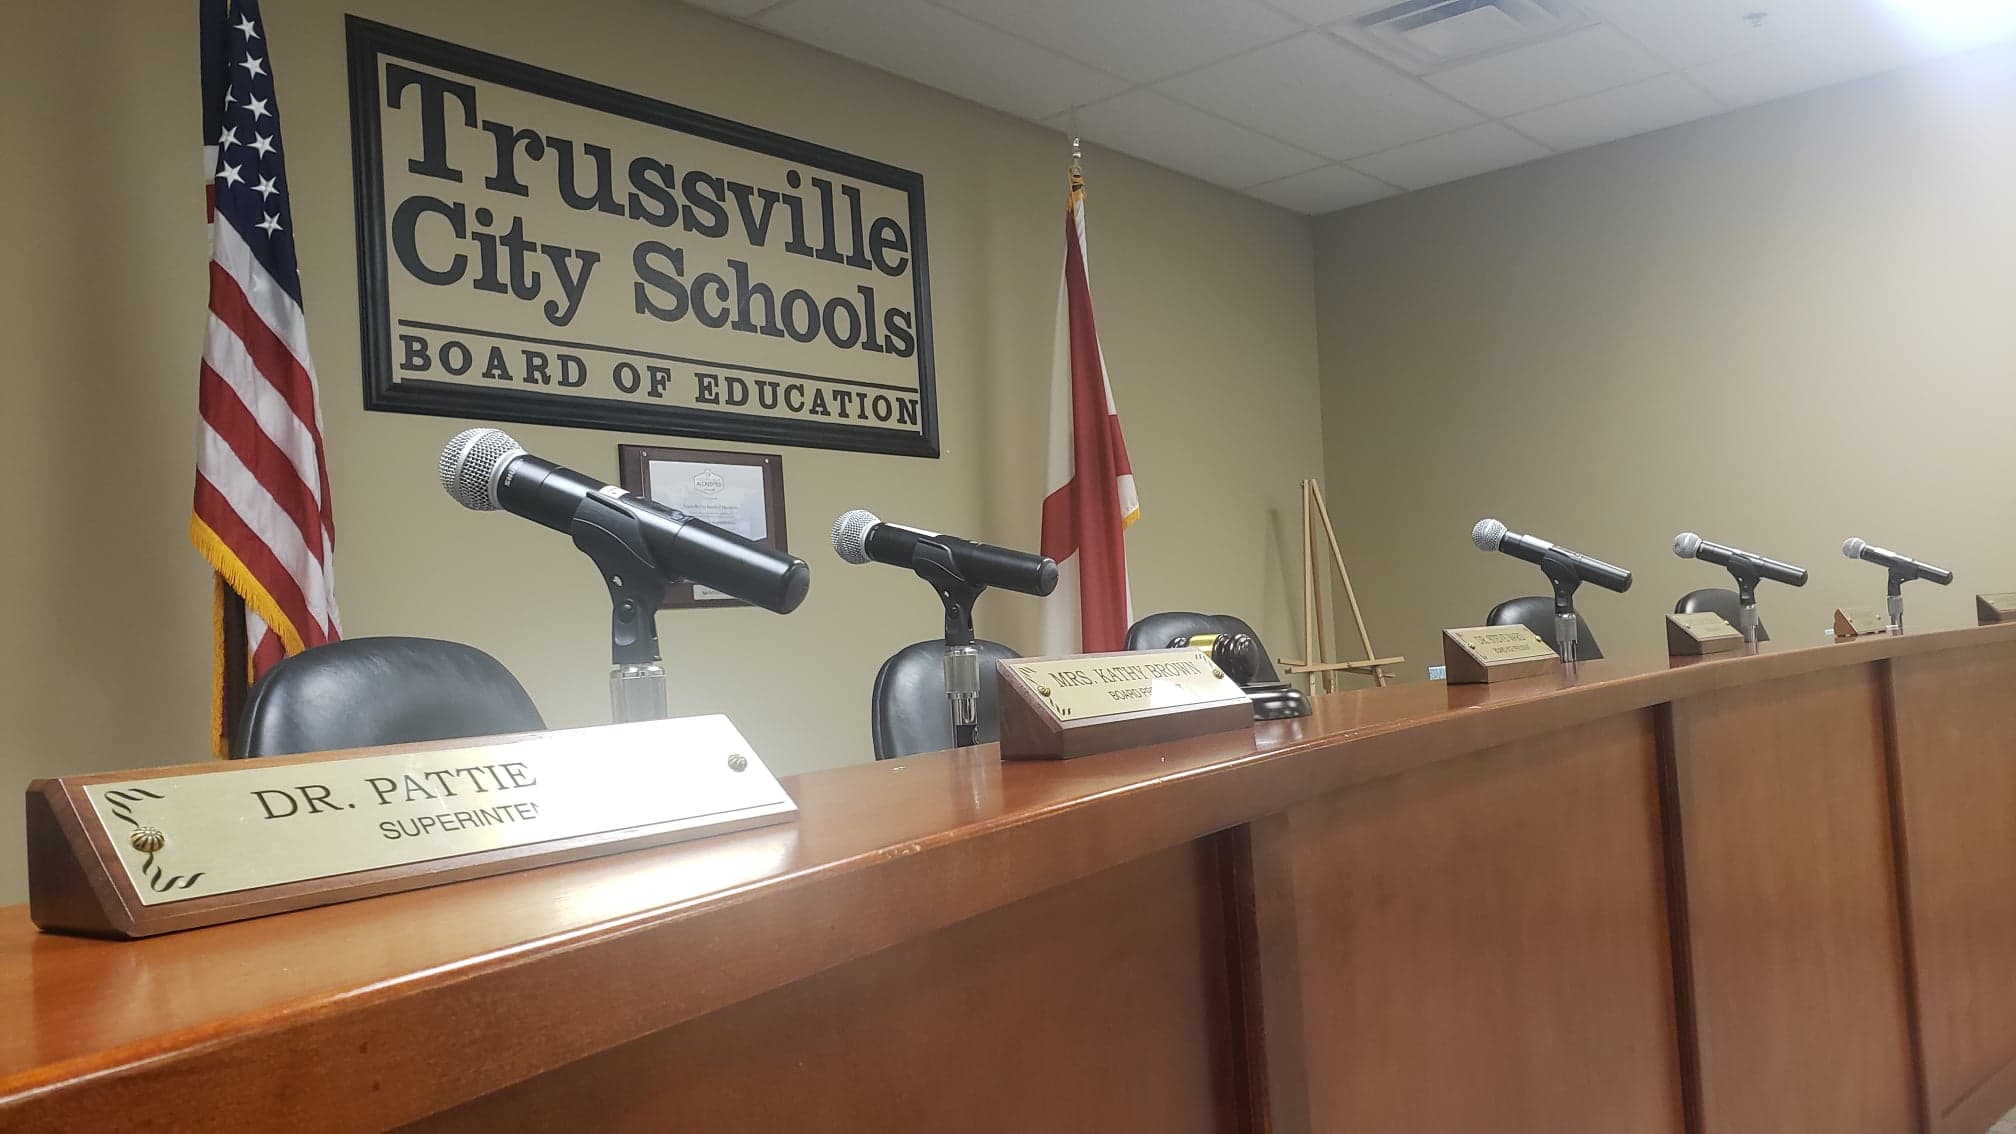 Trussville City Schools says masking is 'encouraged' and 'recommended' but still awaiting more guidance